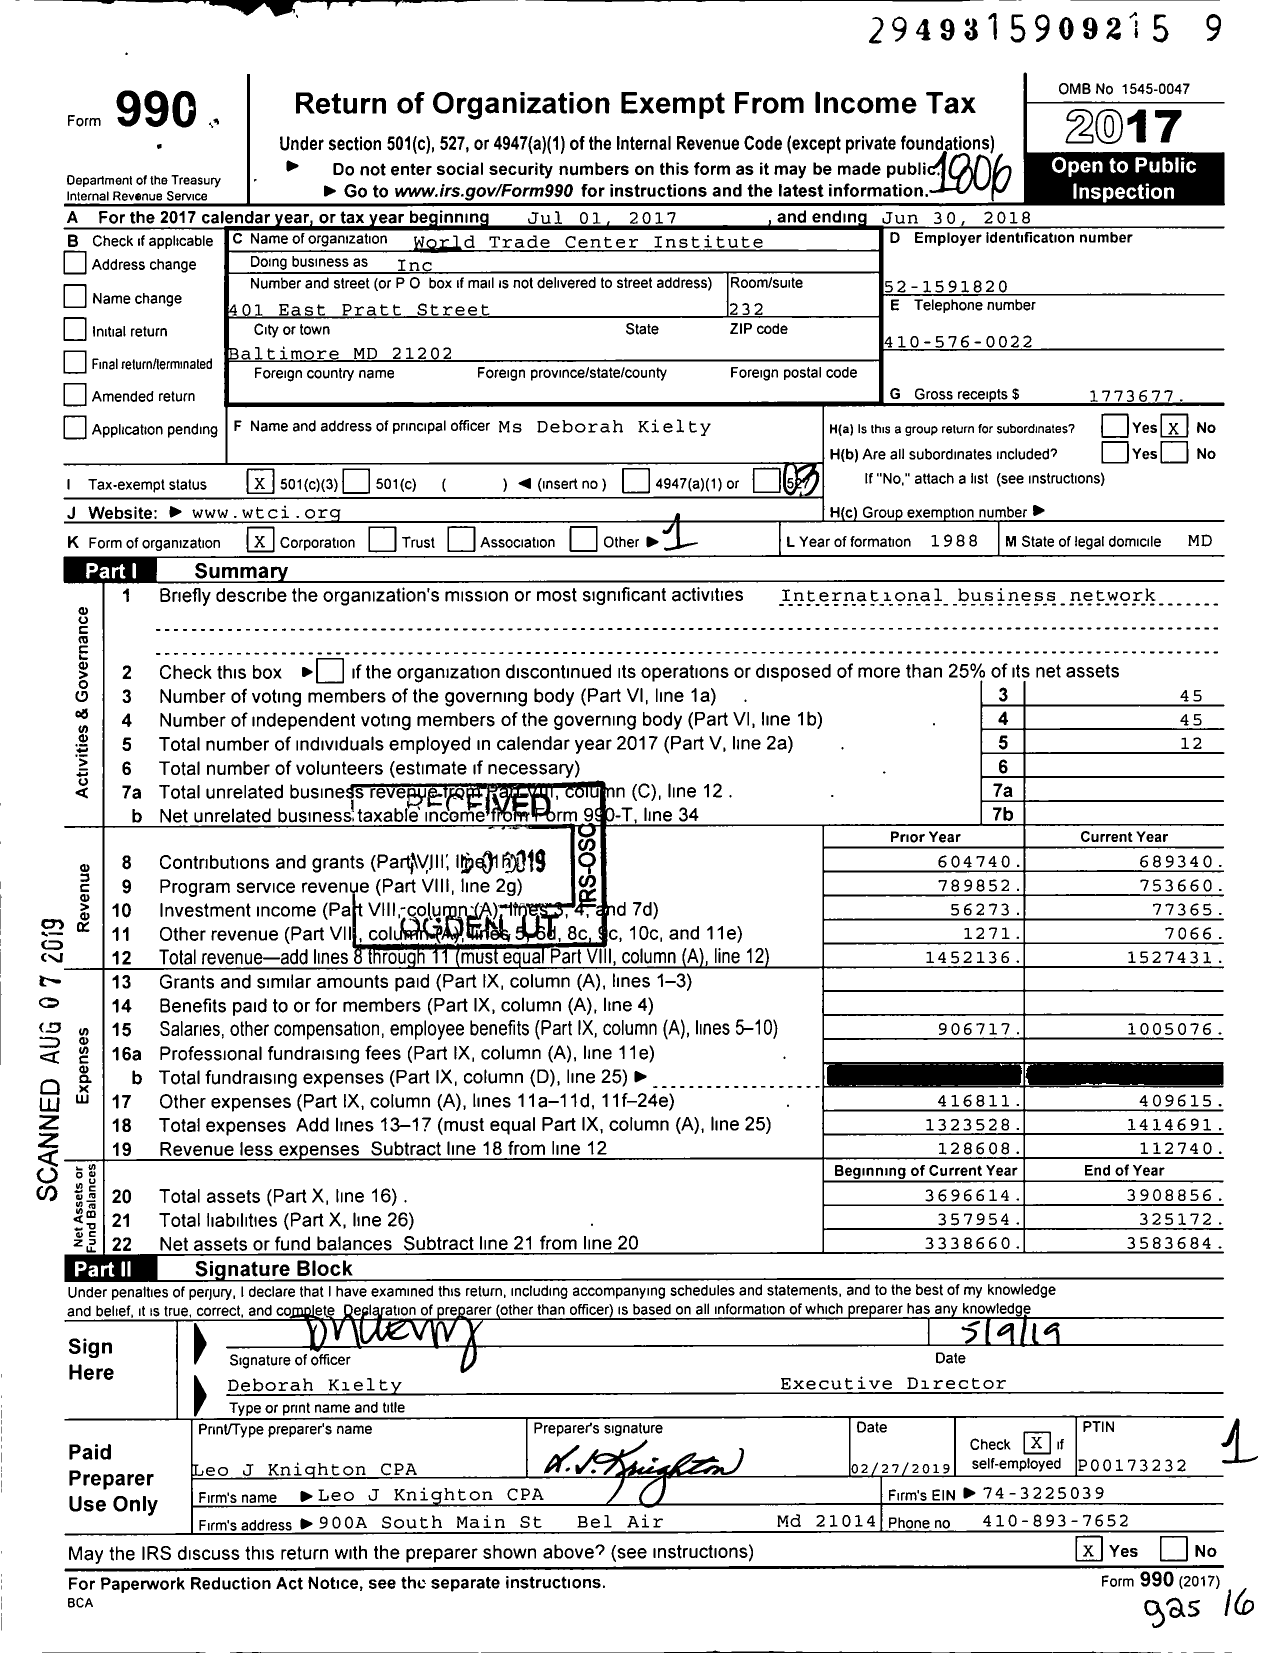 Image of first page of 2017 Form 990 for World Trade Center Institute (WTCI)